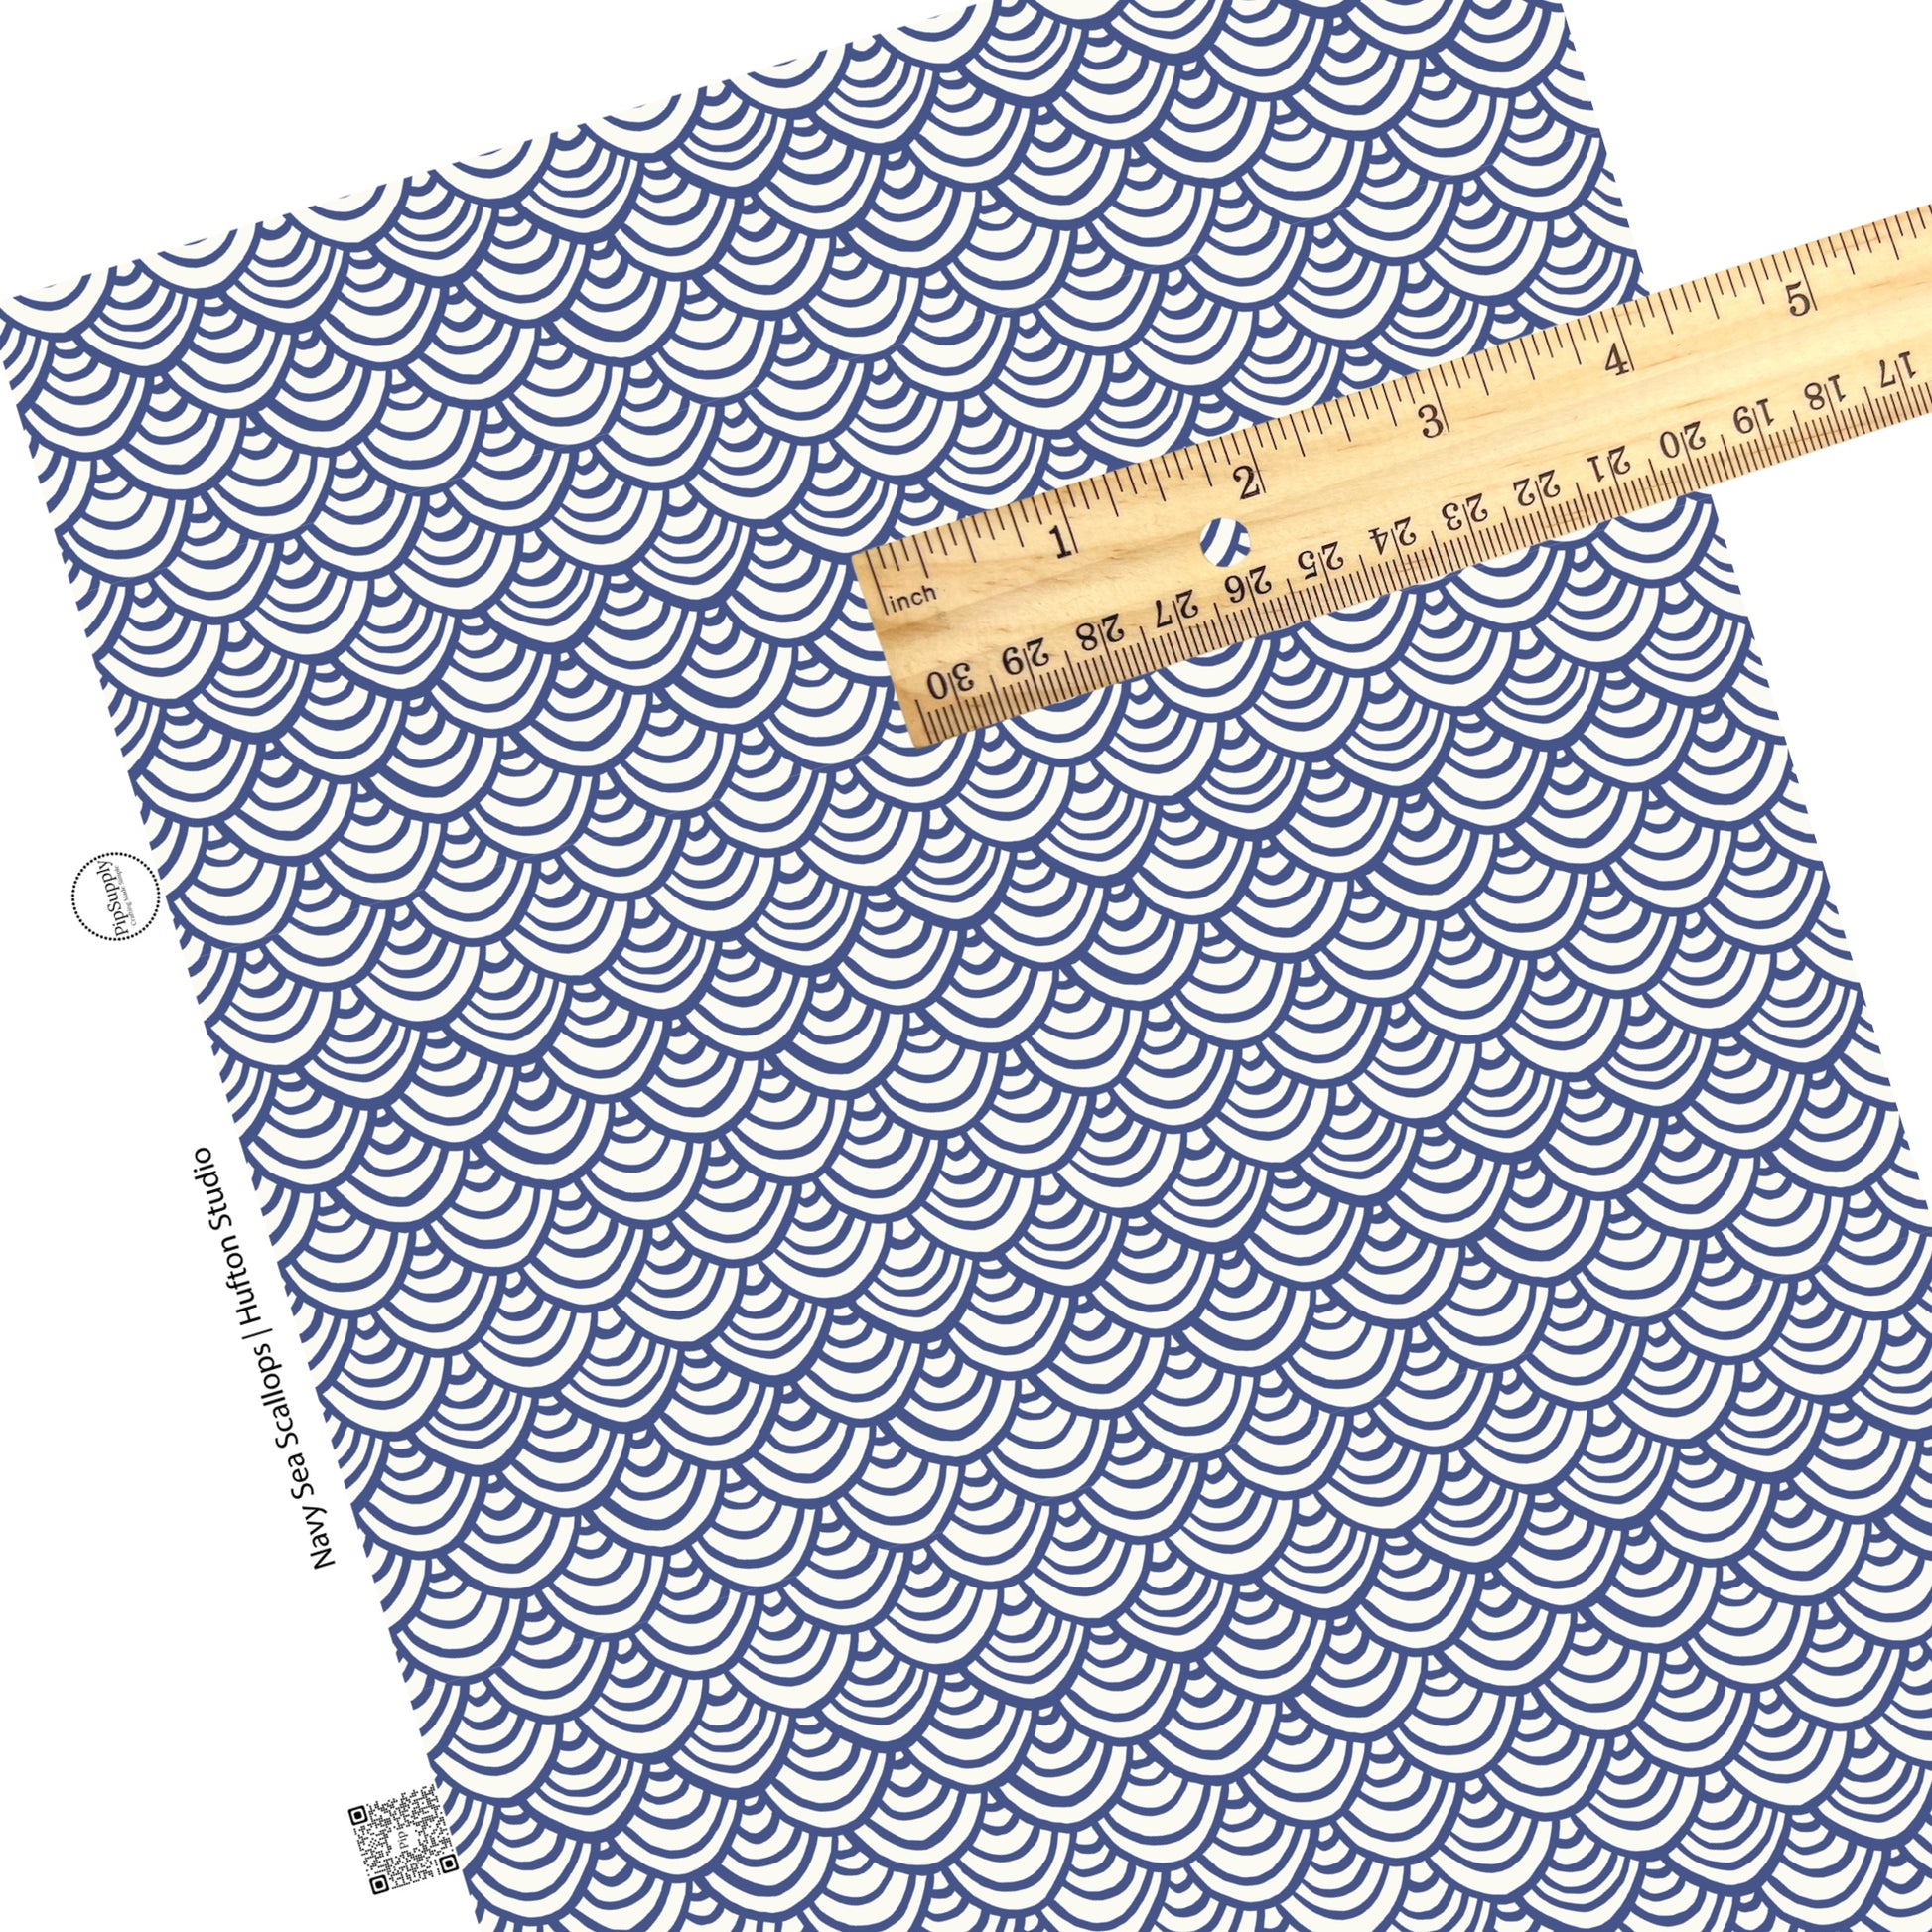 These summer faux leather sheets contain the following design elements: blue and white scallops patterns. Our CPSIA compliant faux leather sheets or rolls can be used for all types of crafting projects.